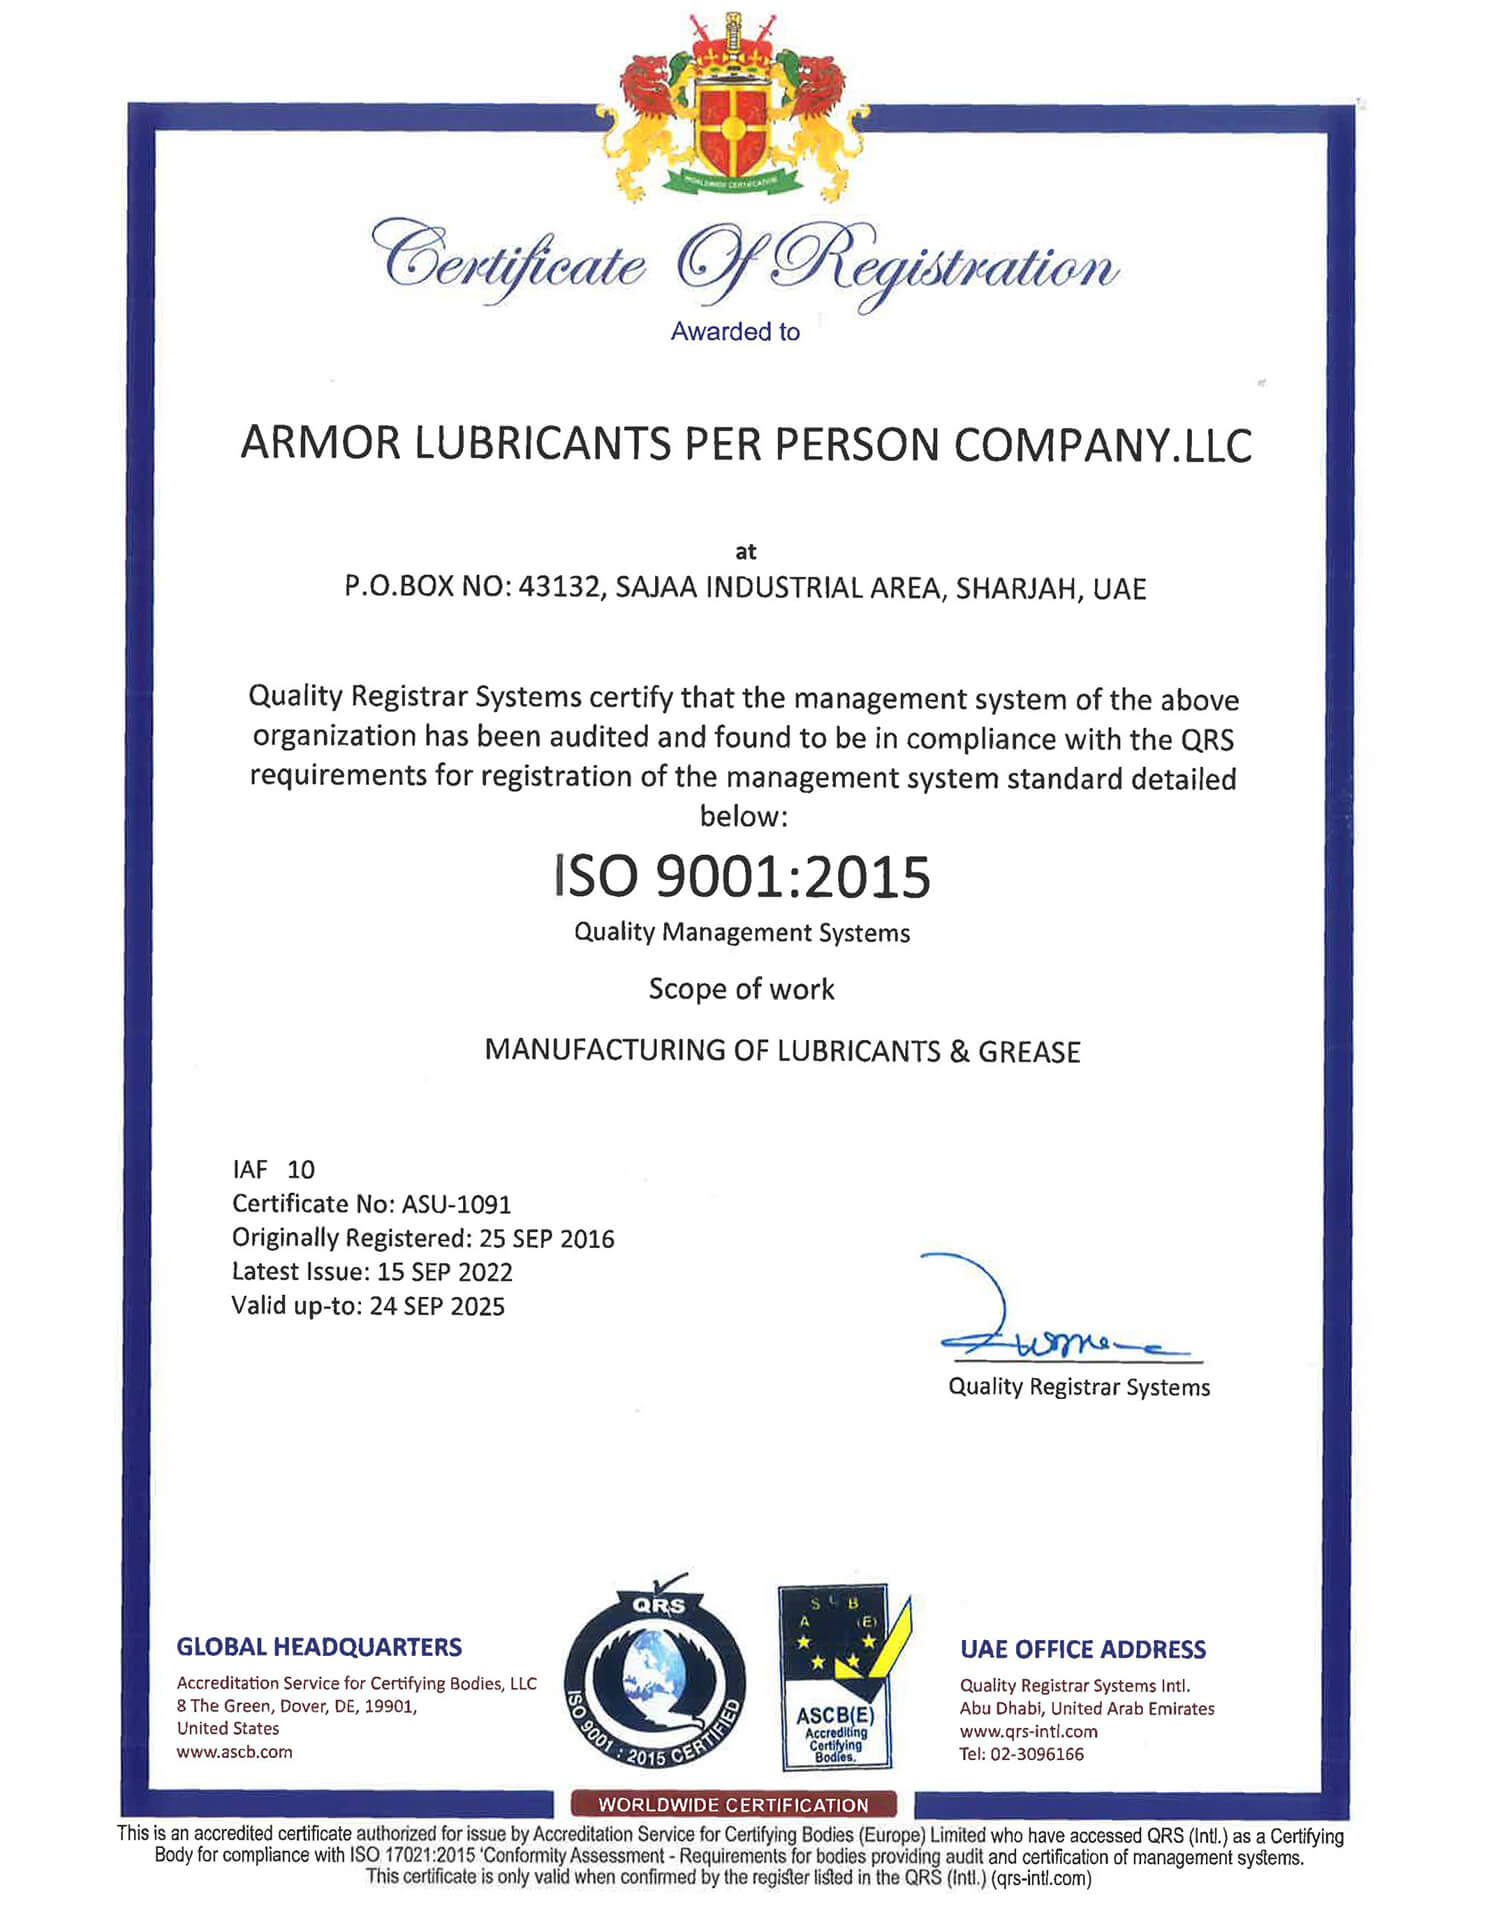 Armor Lubricants Certificate of Registration ISO 9001:2015 Quality Management Systems